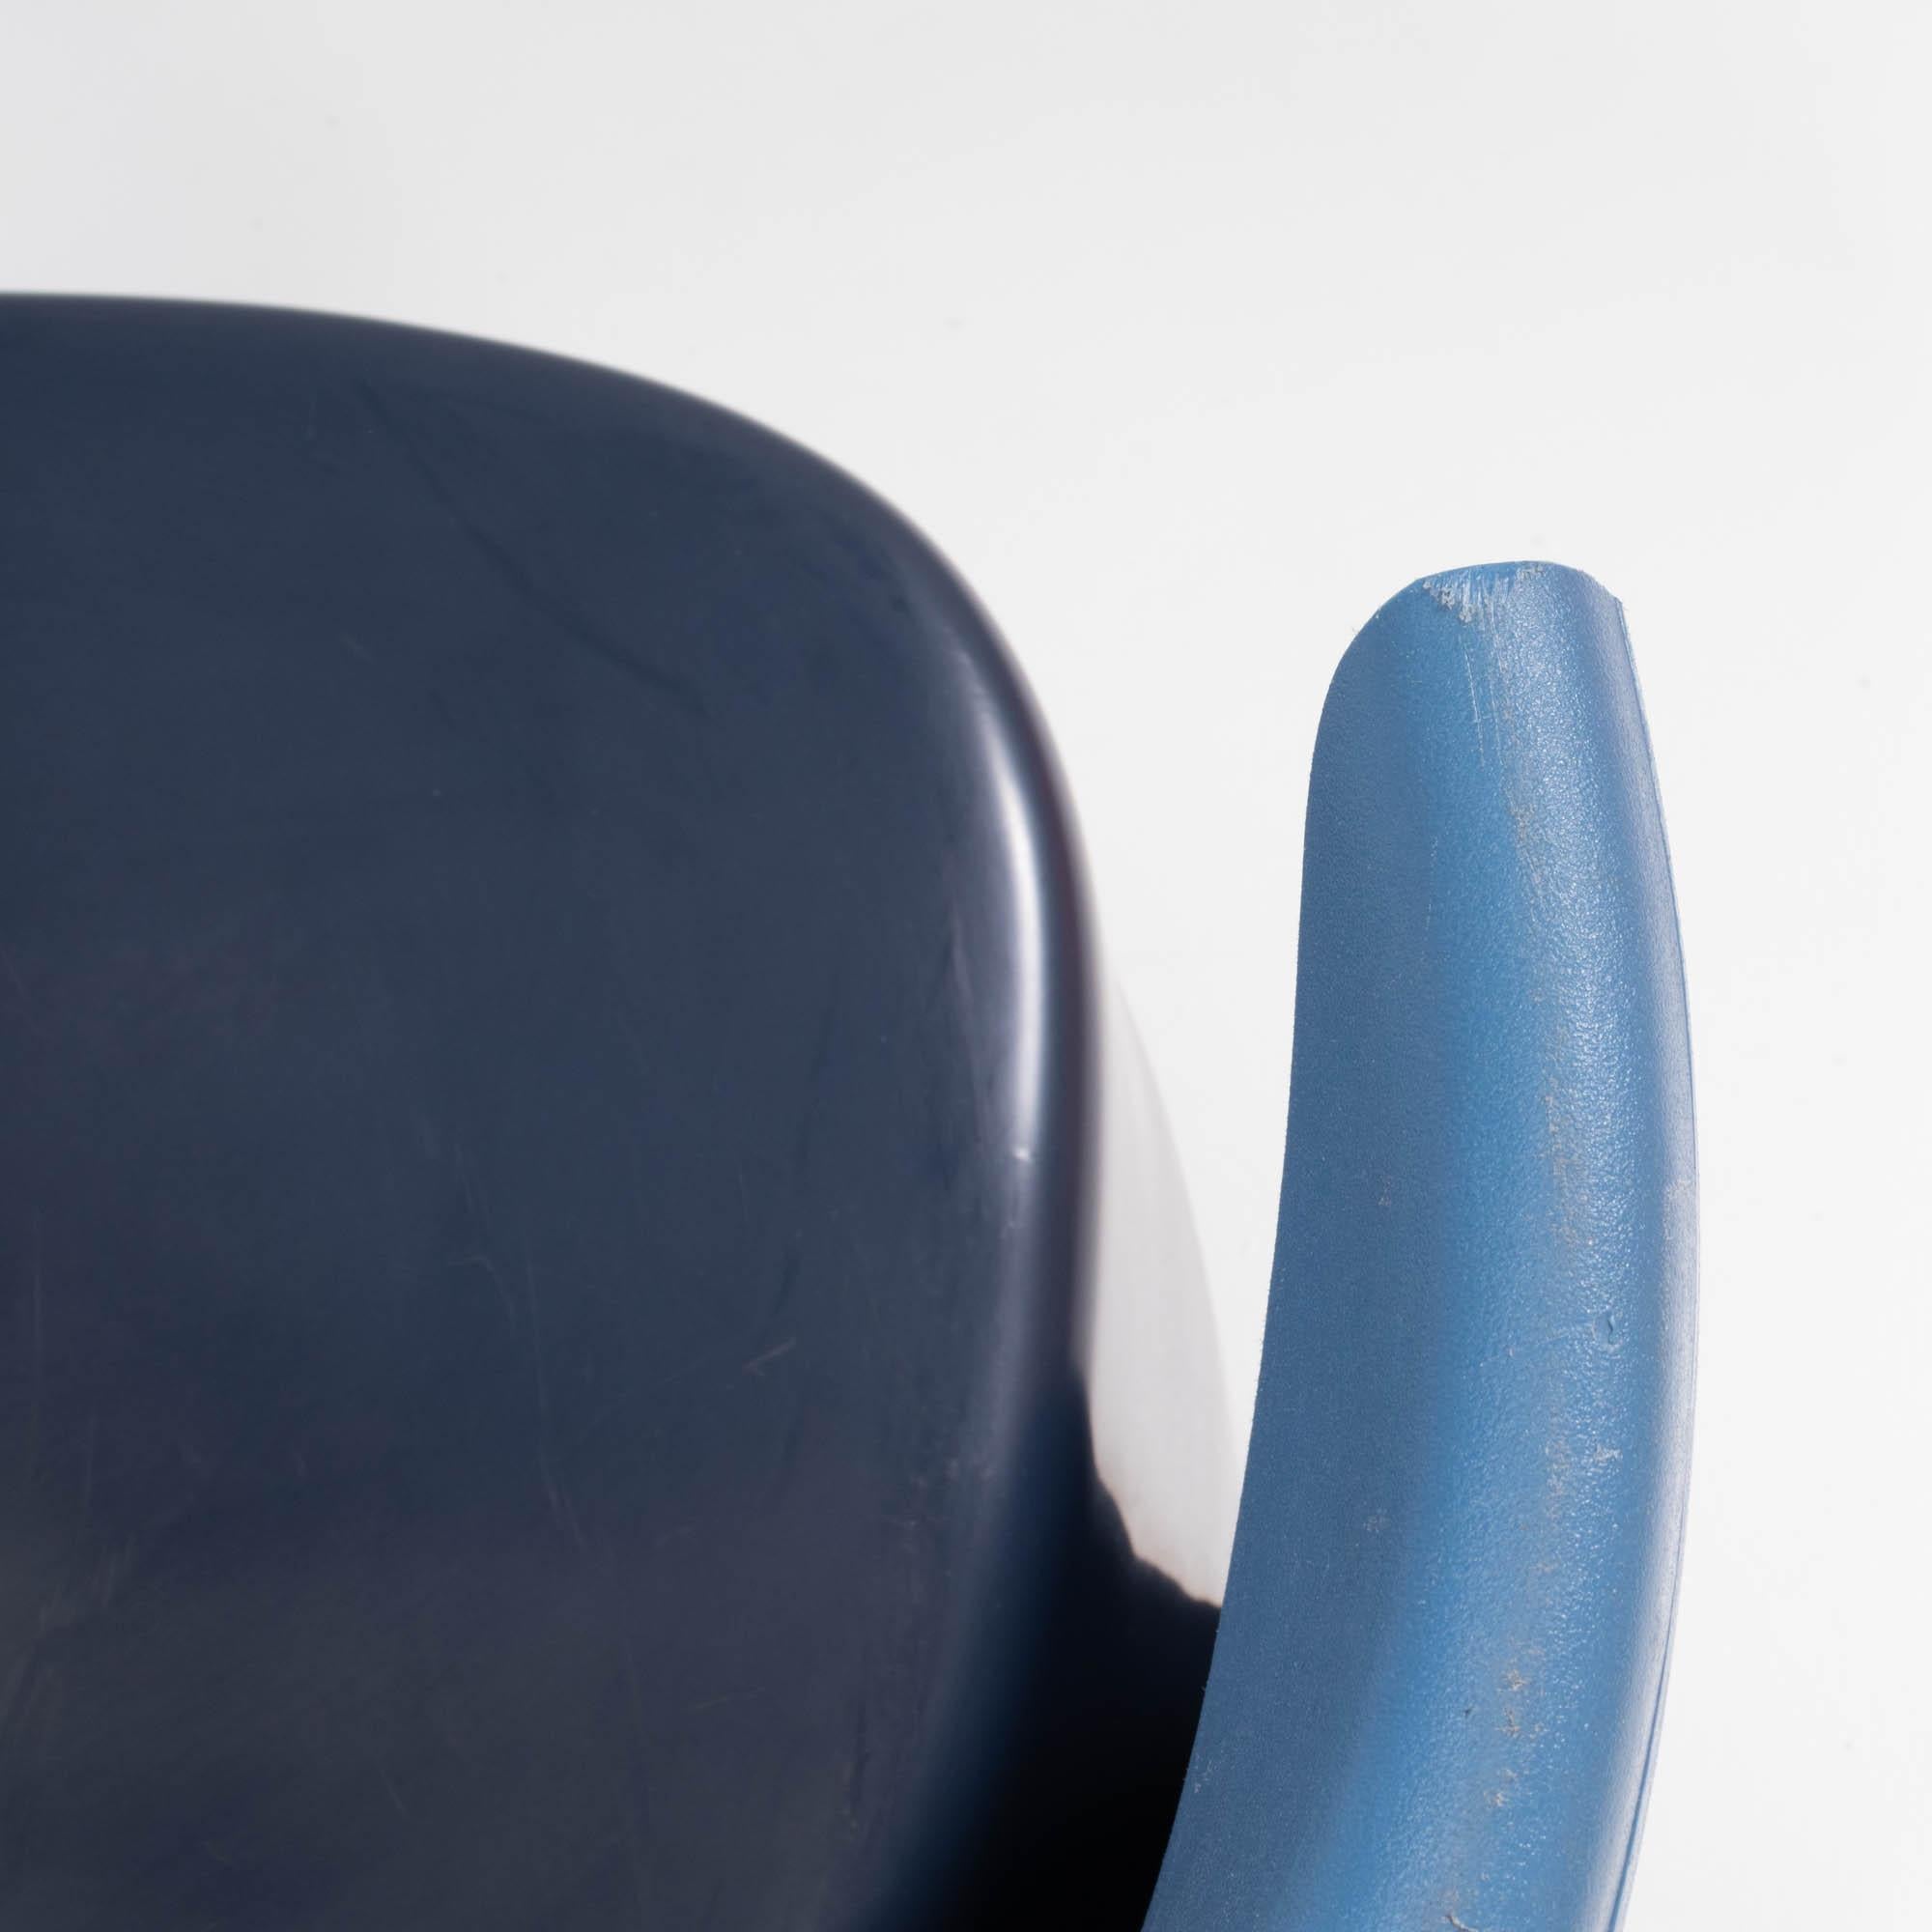 Cappellini by Ron Arad ‘Nino Rota’ Blue & Green Chairs, Set of 2 1